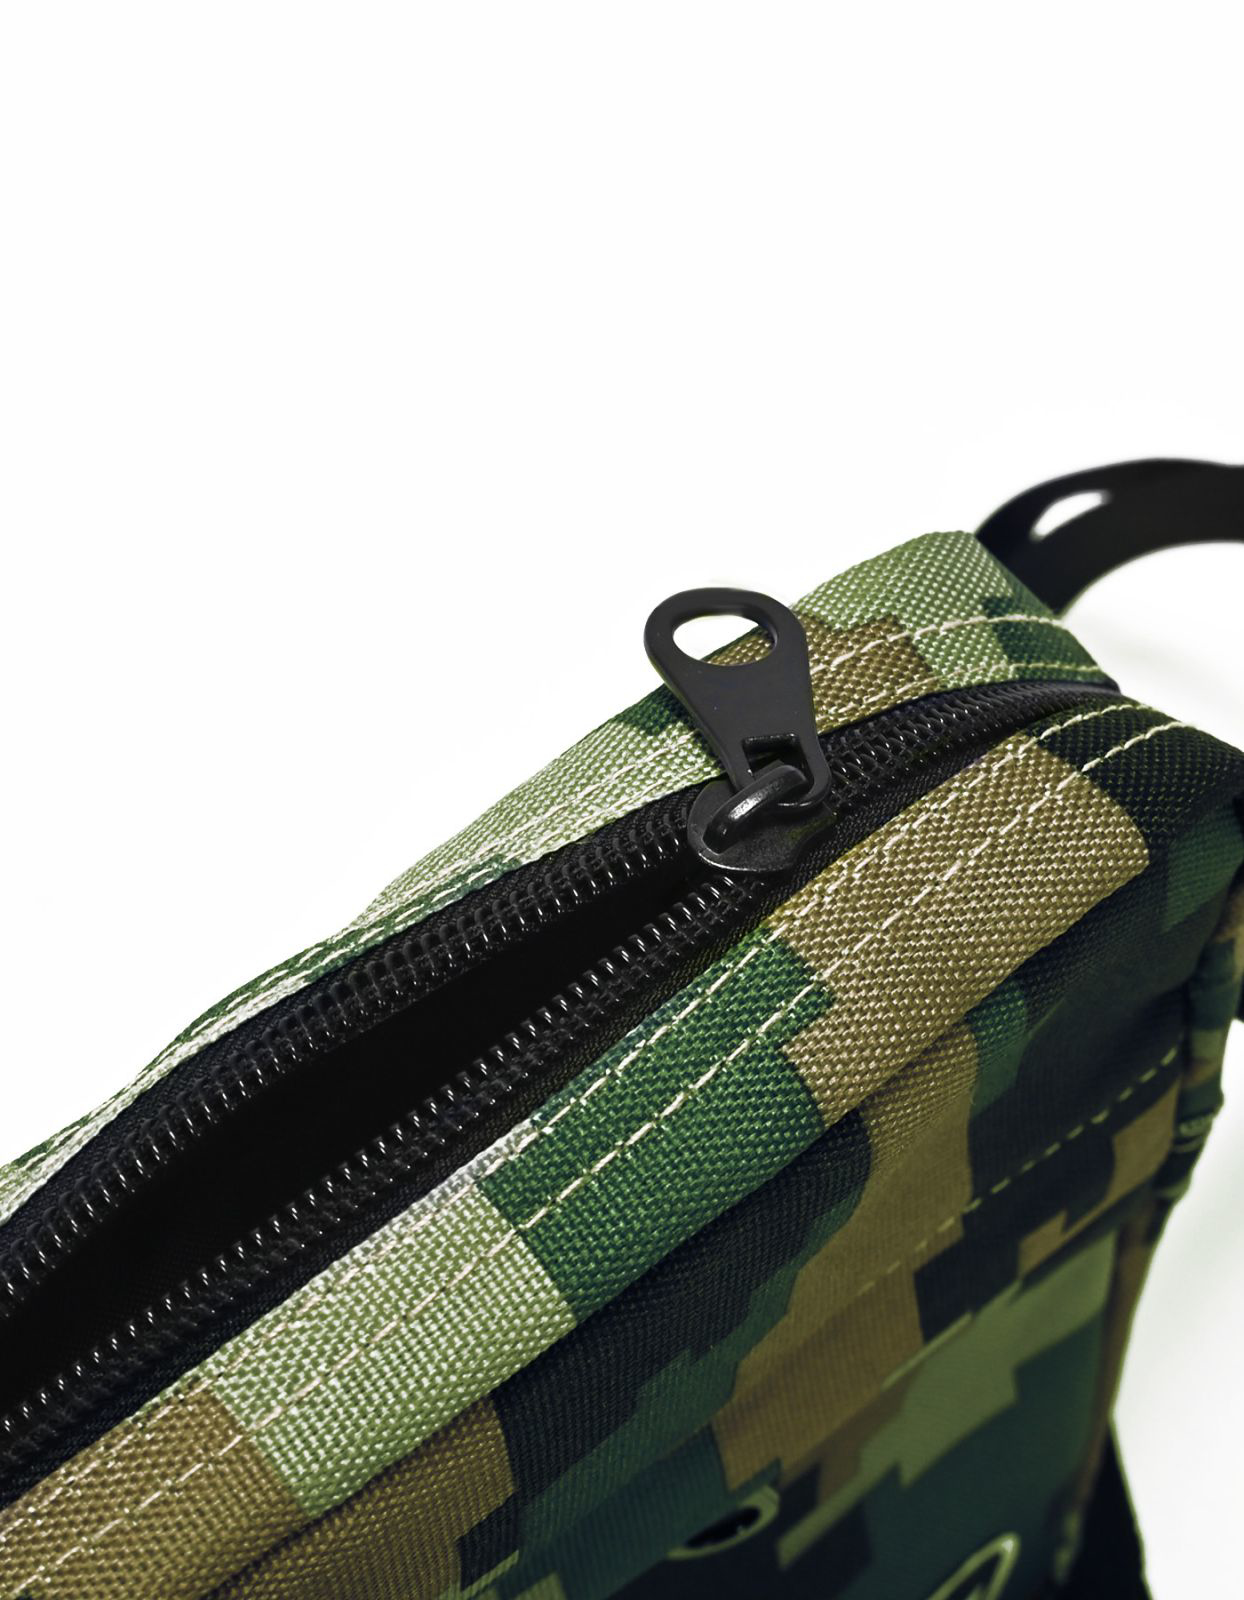 Picture of Camo Sling Bag